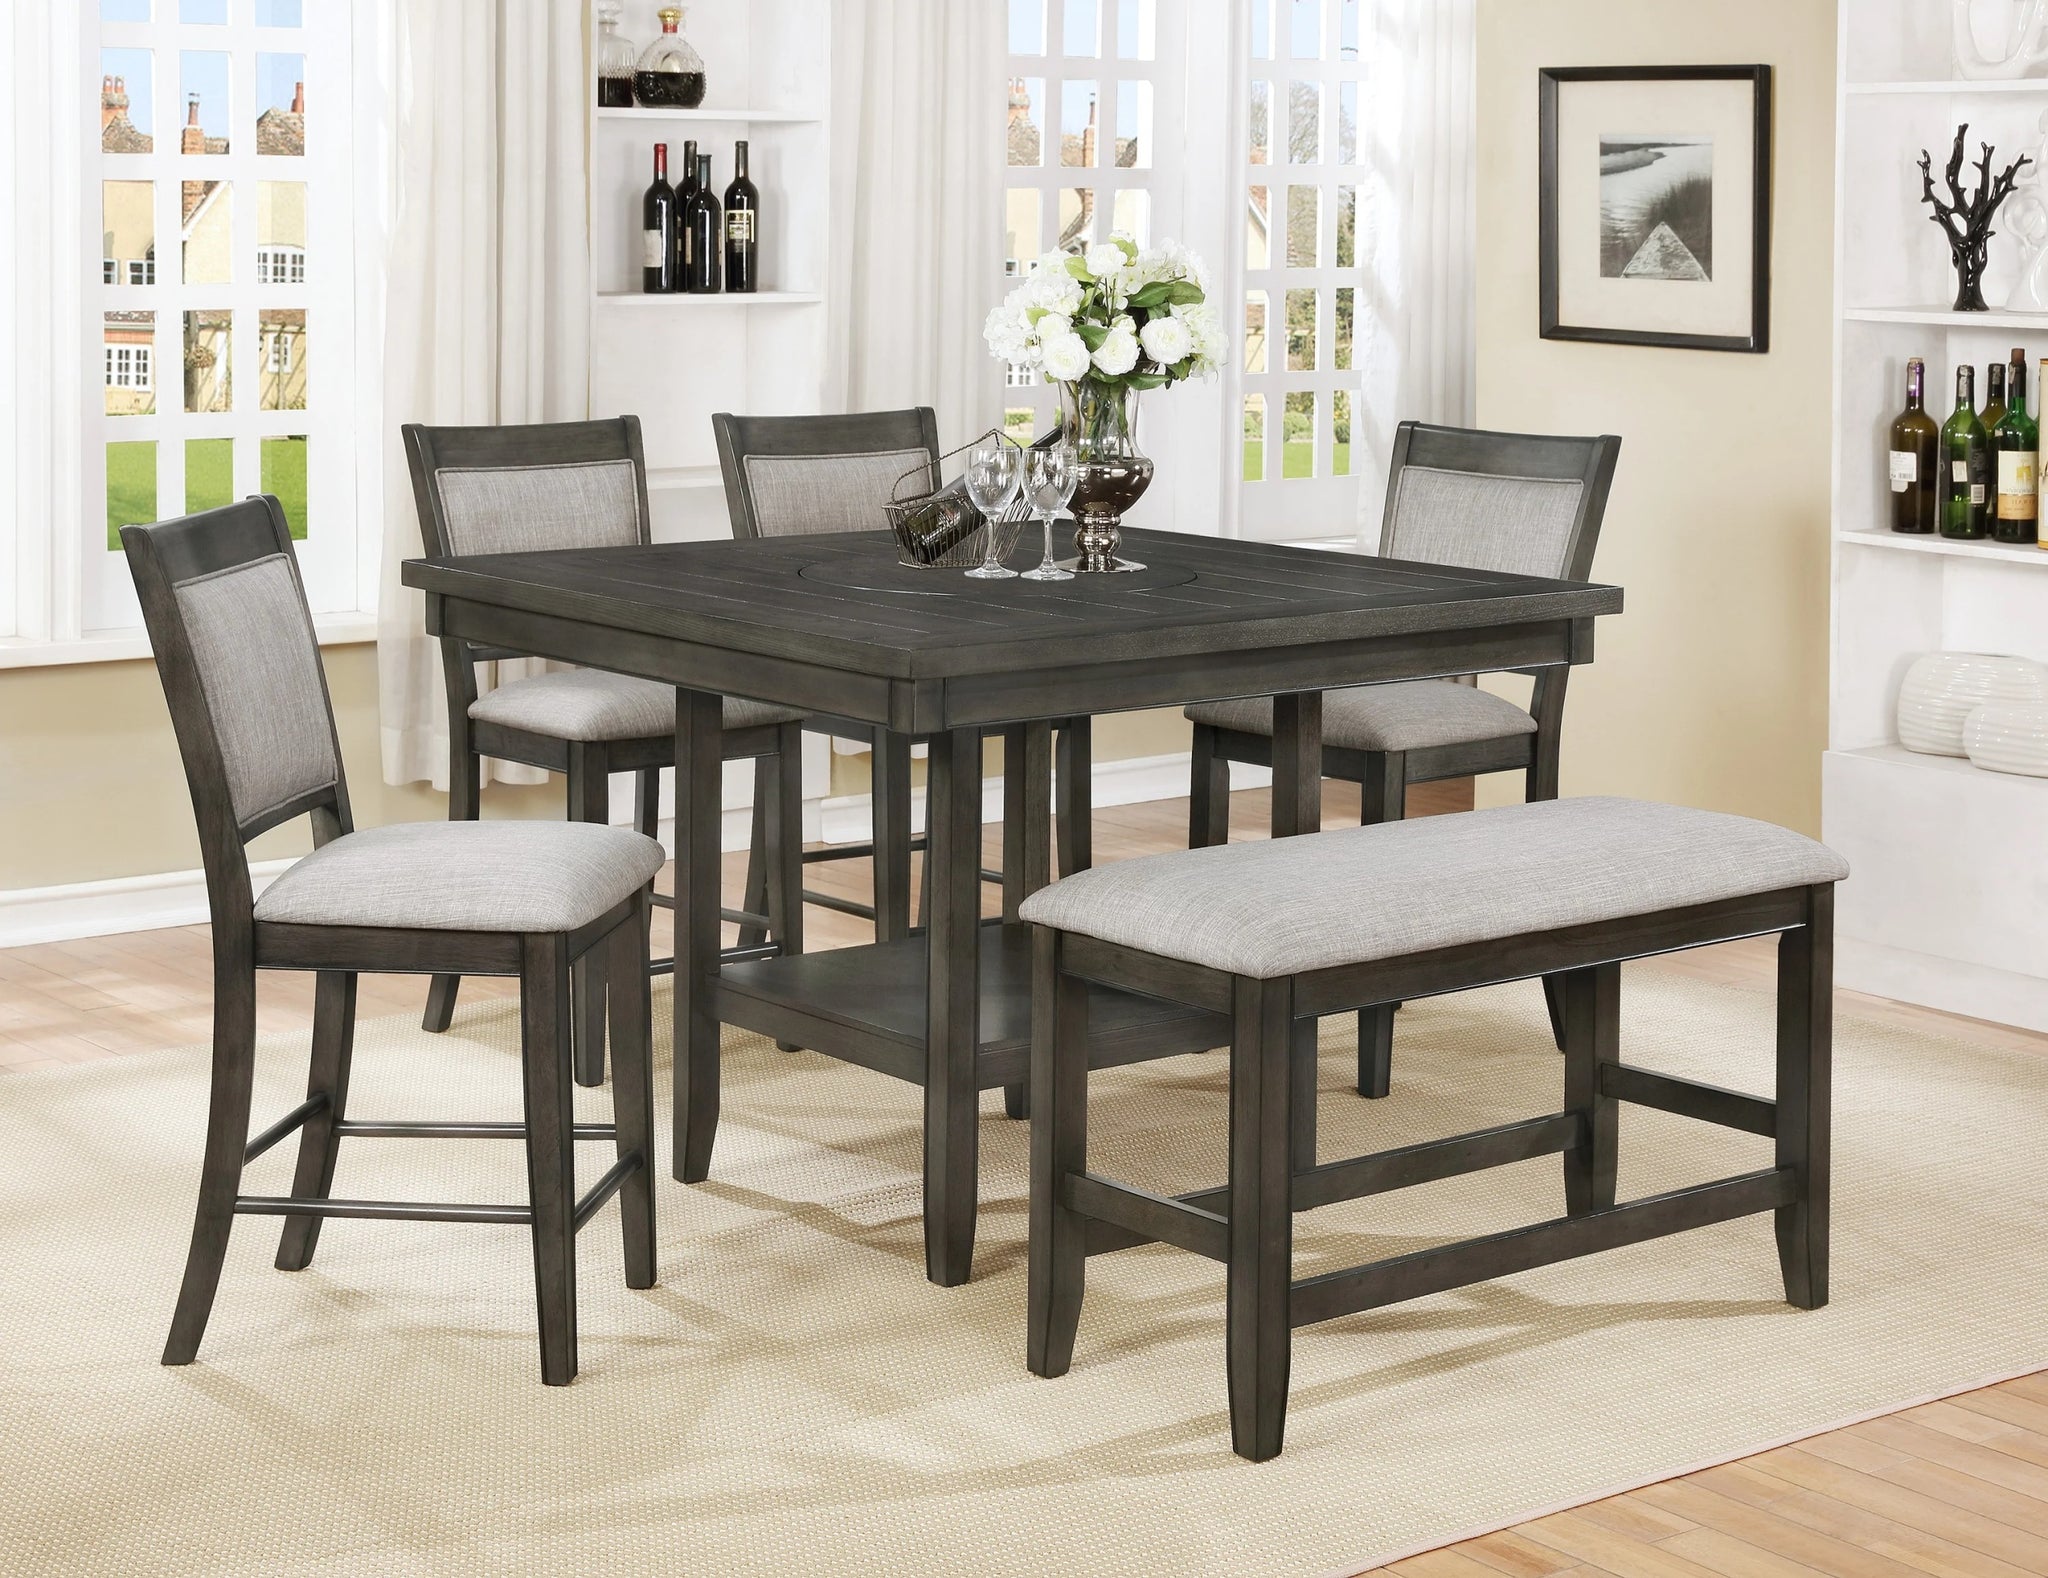 6pc Dining Set Contemporary Farmhouse Style Counter upholstered chair-wood-gray-seats 6-wood-dining